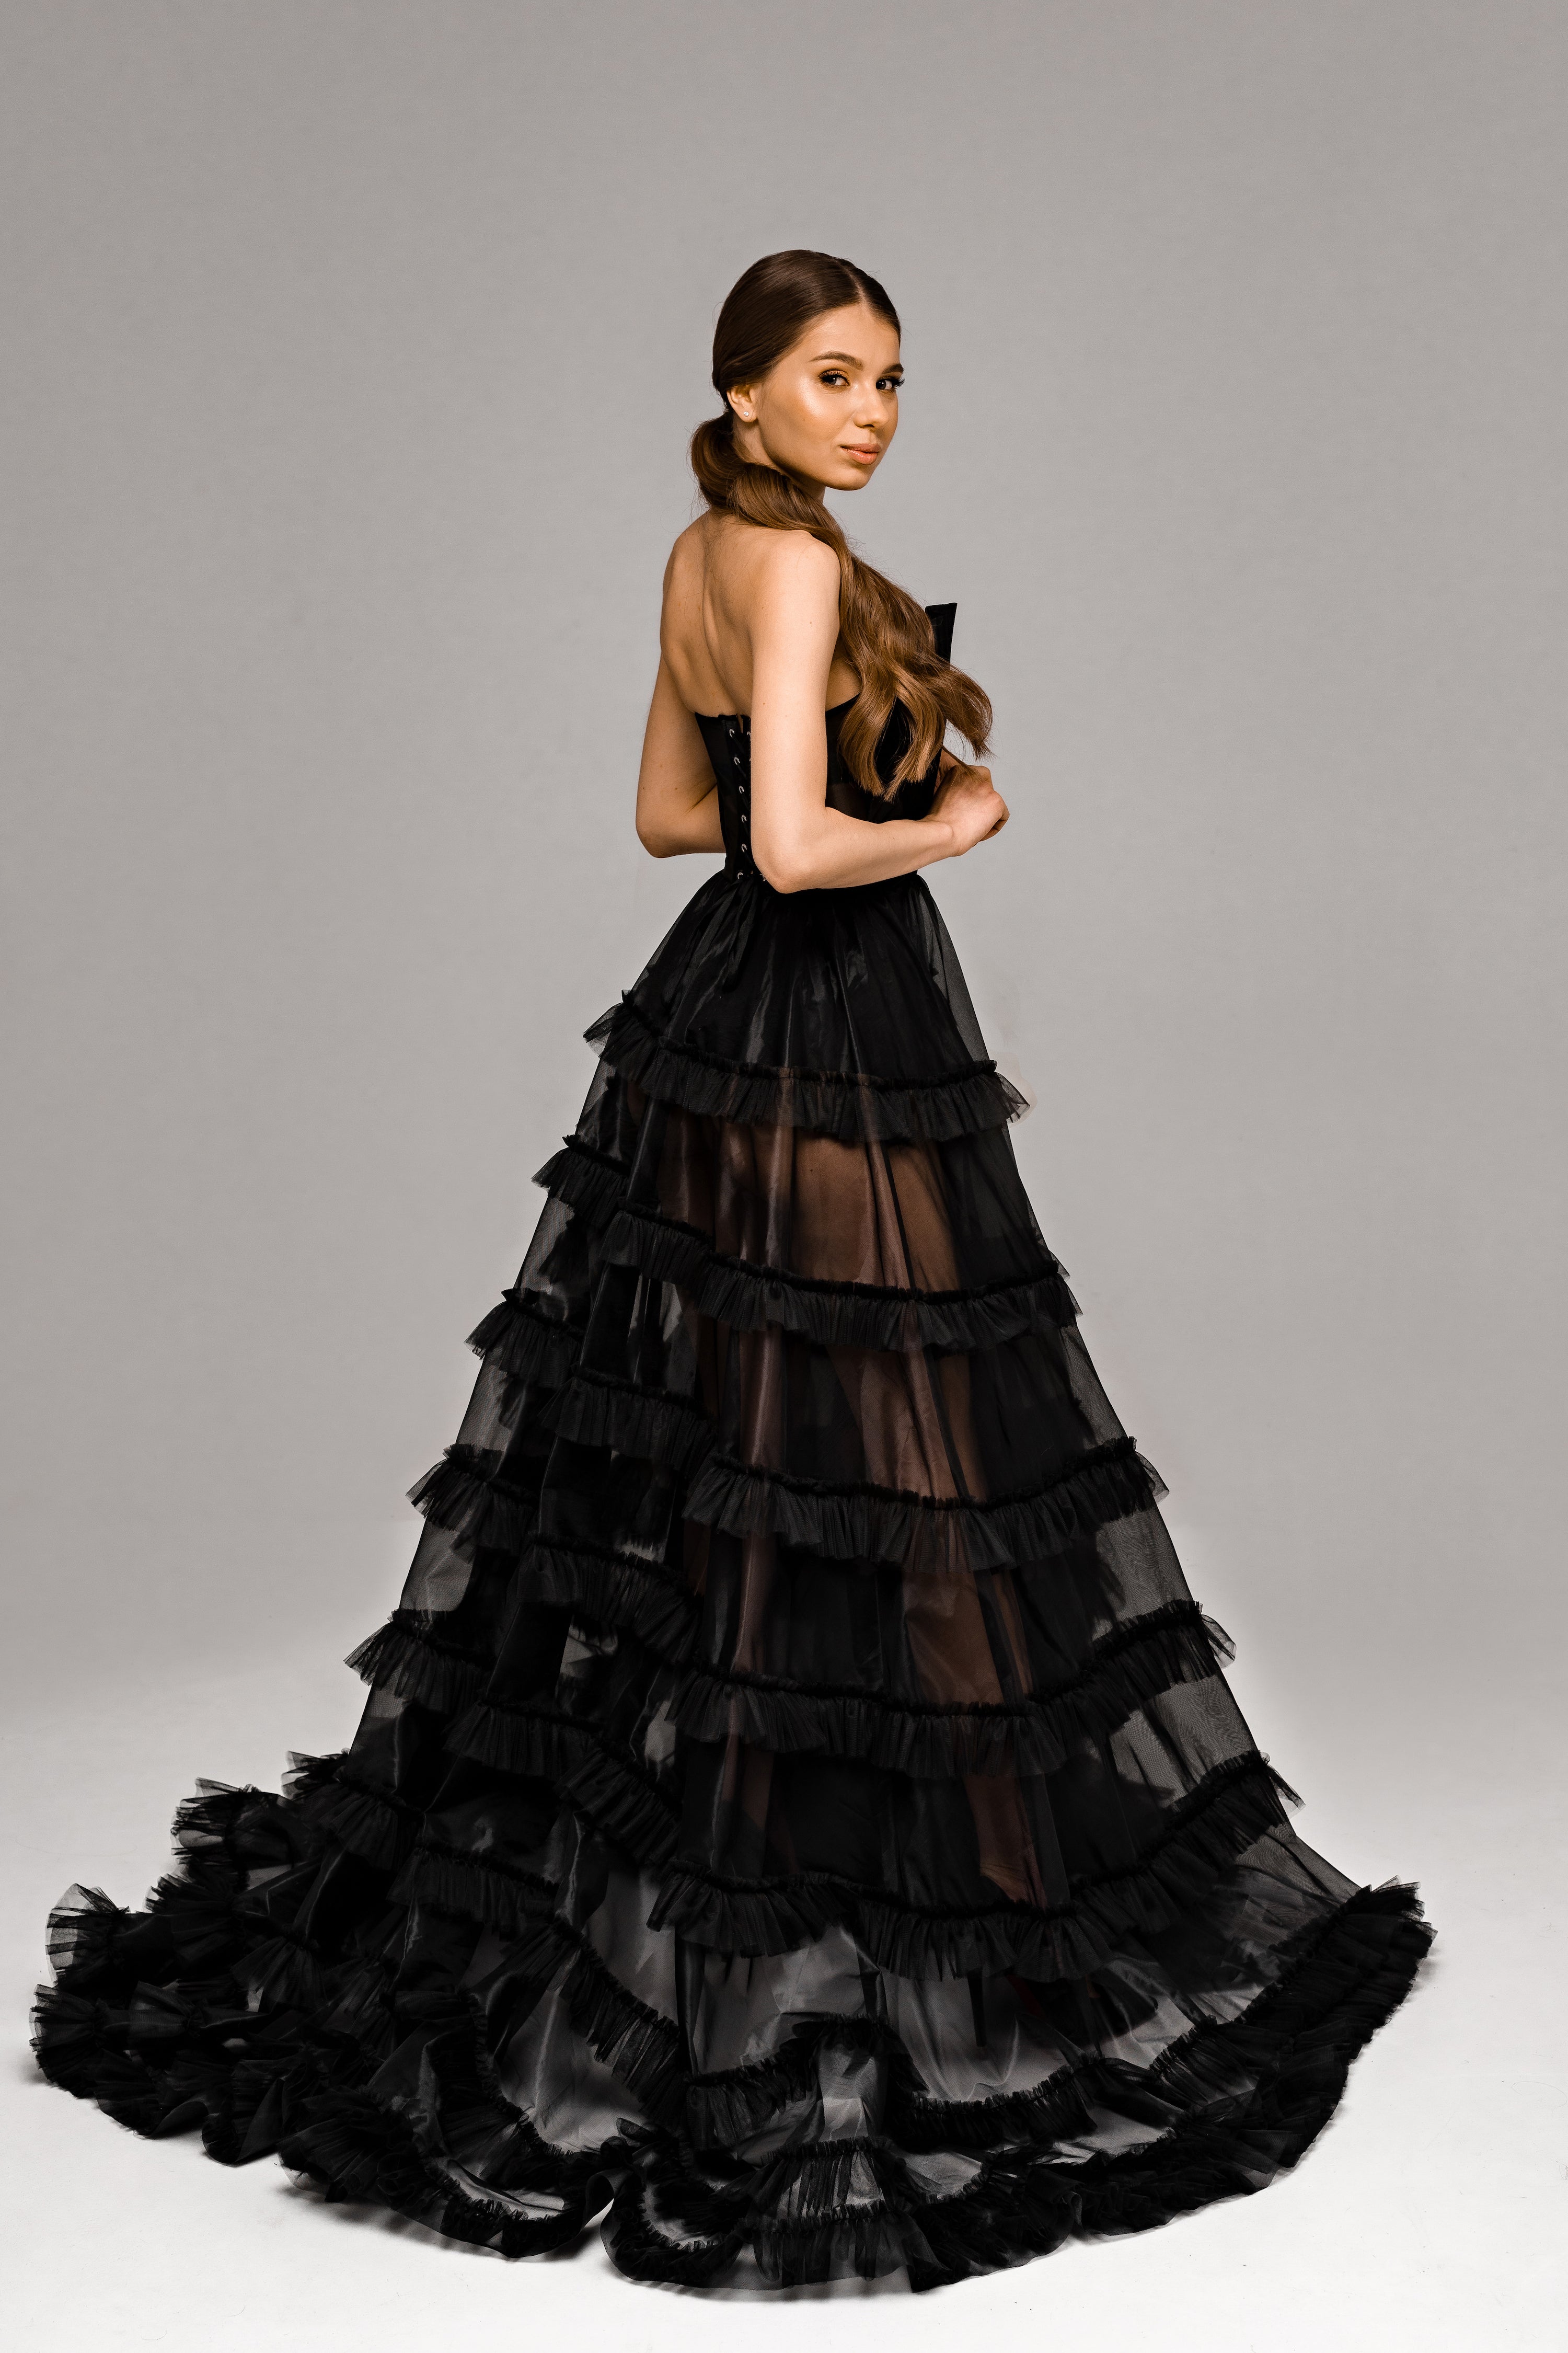 "Onyx" Black Floral Corset Wedding Dress with Embroidered Ruffled Train